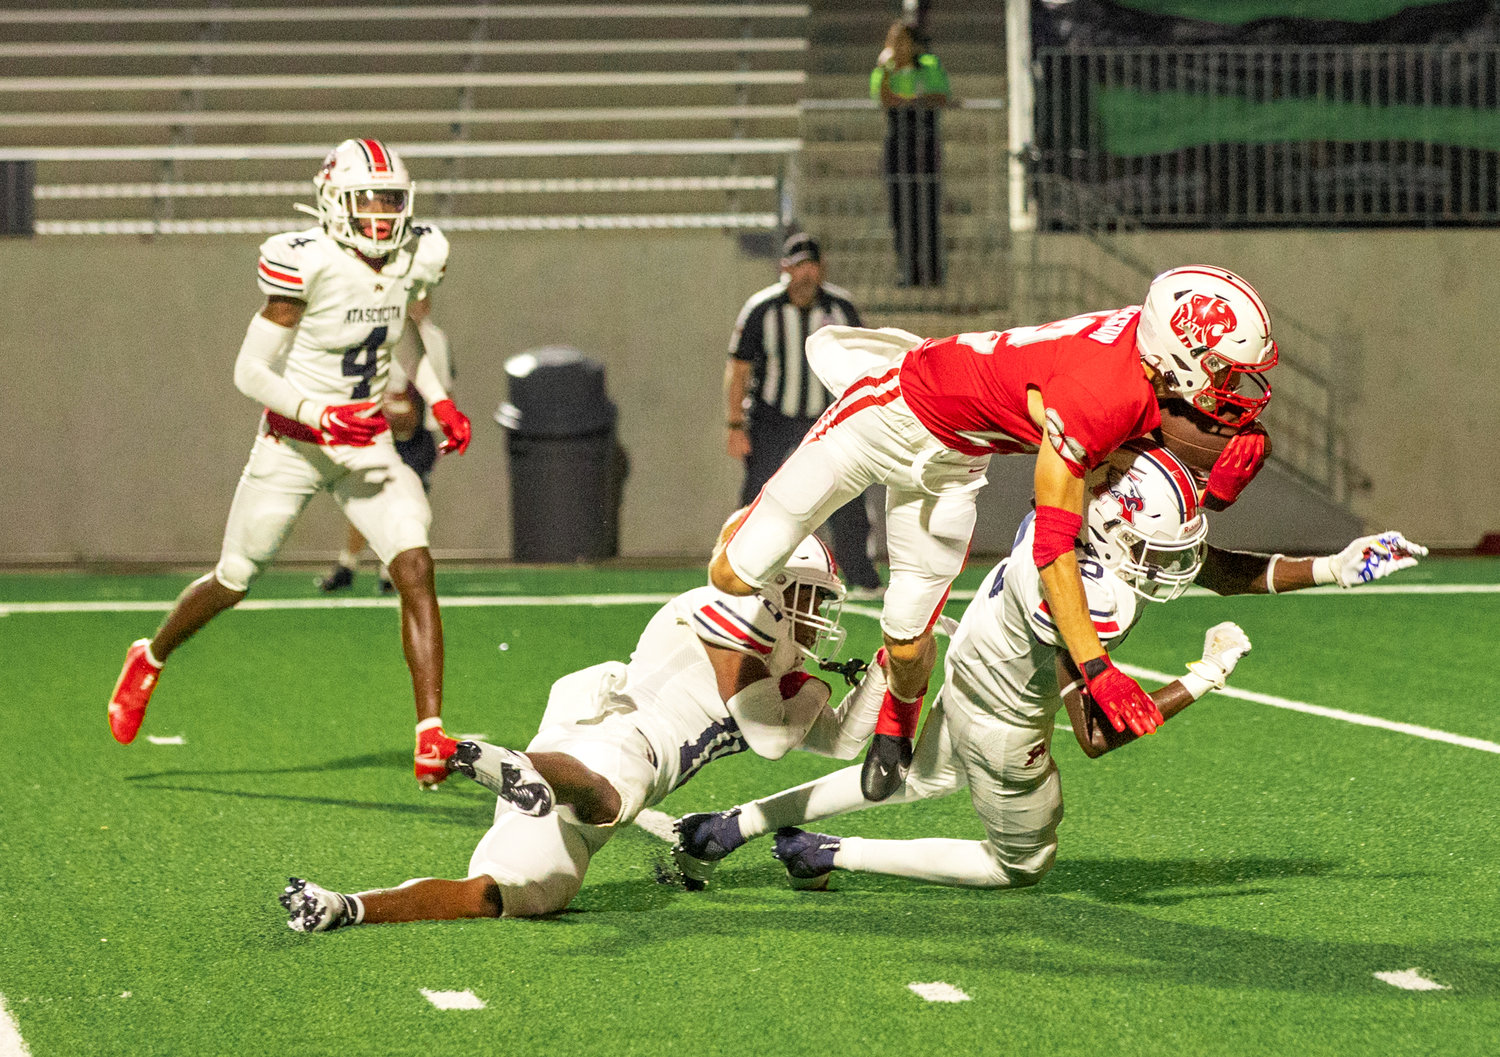 Katy’s Adam Jackson dives over Atascocita defenders to score a touchdown during Friday’s game between Katy and Atascocita at Legacy Stadium.